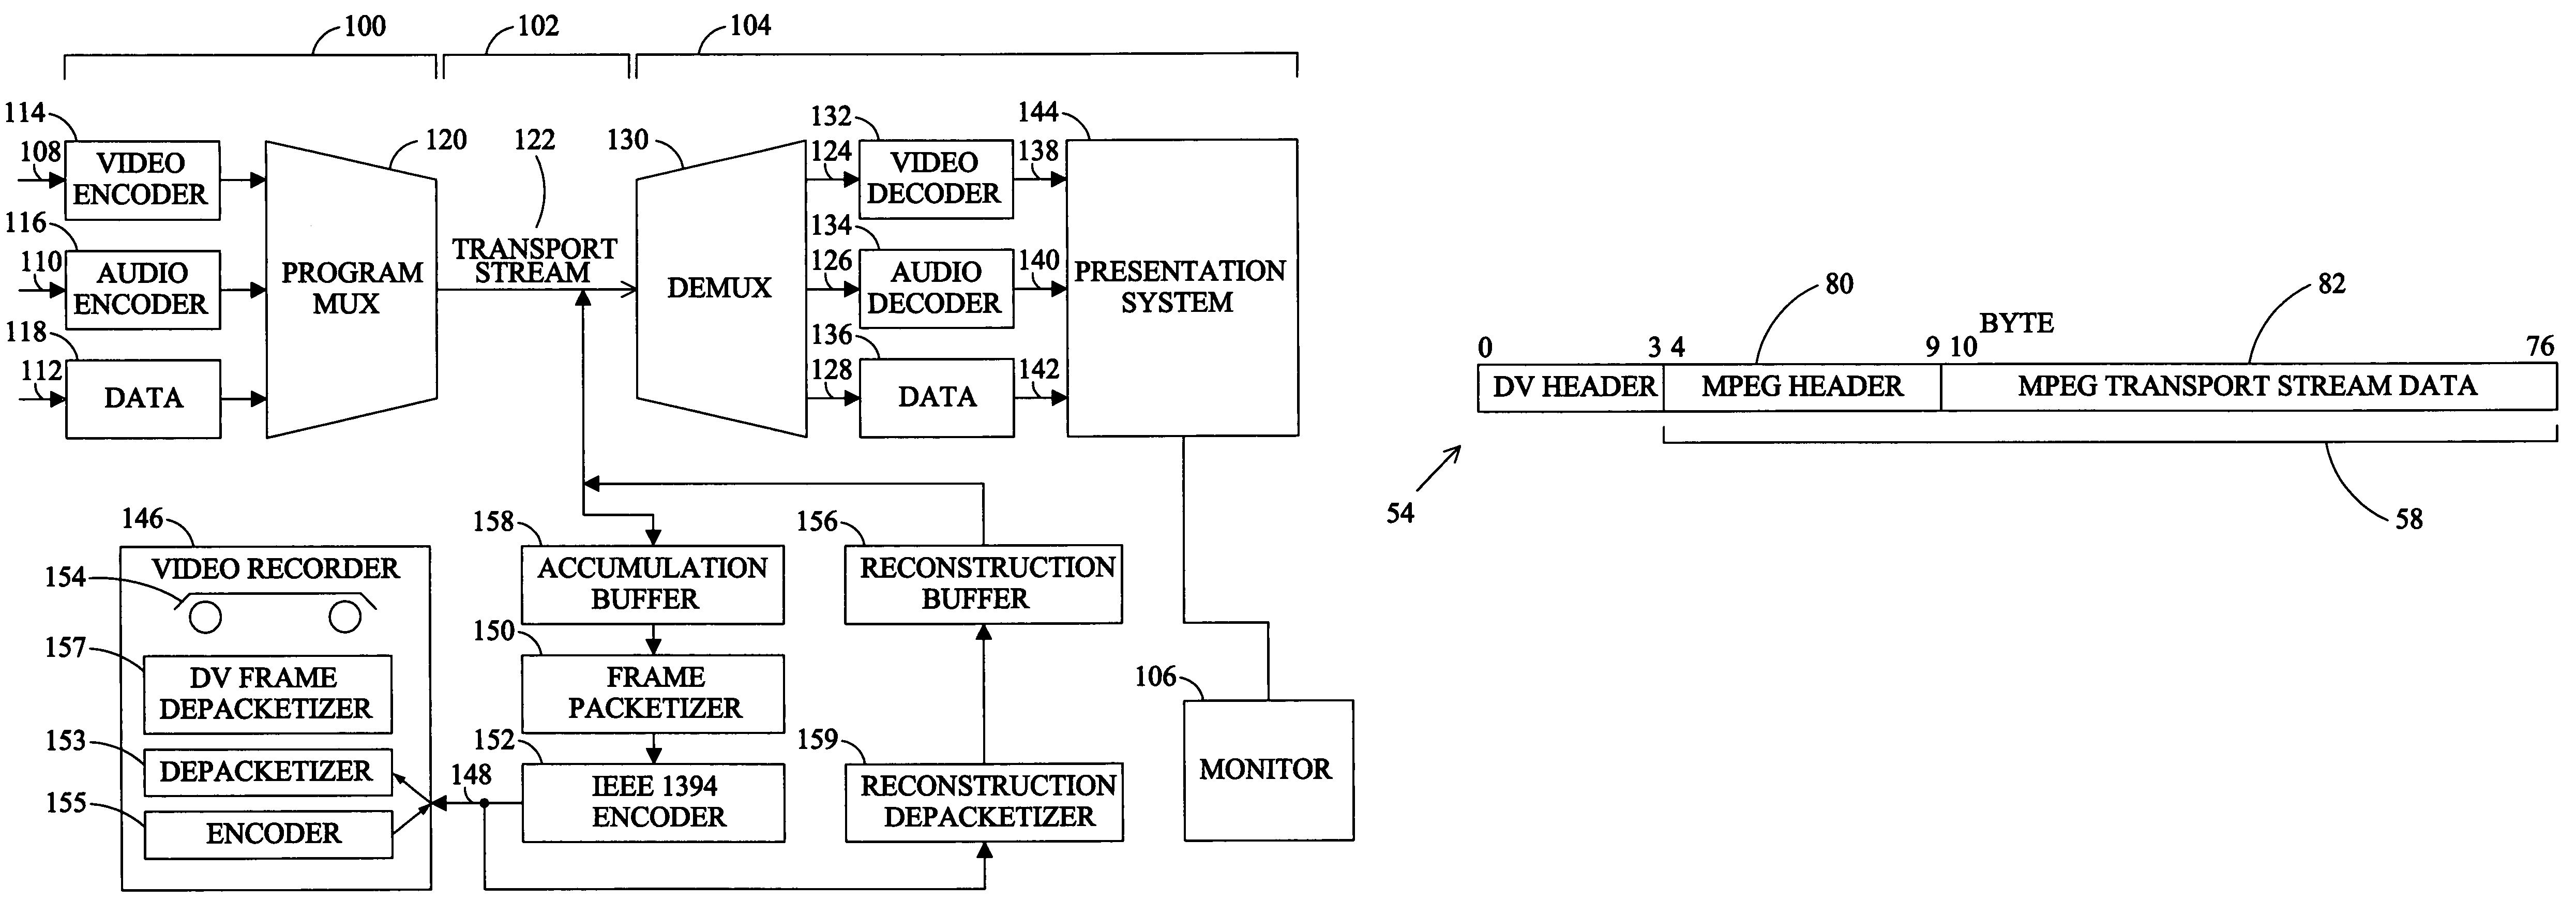 Method and apparatus for storing MPEG-2 transport streams using a conventional digital video recorder